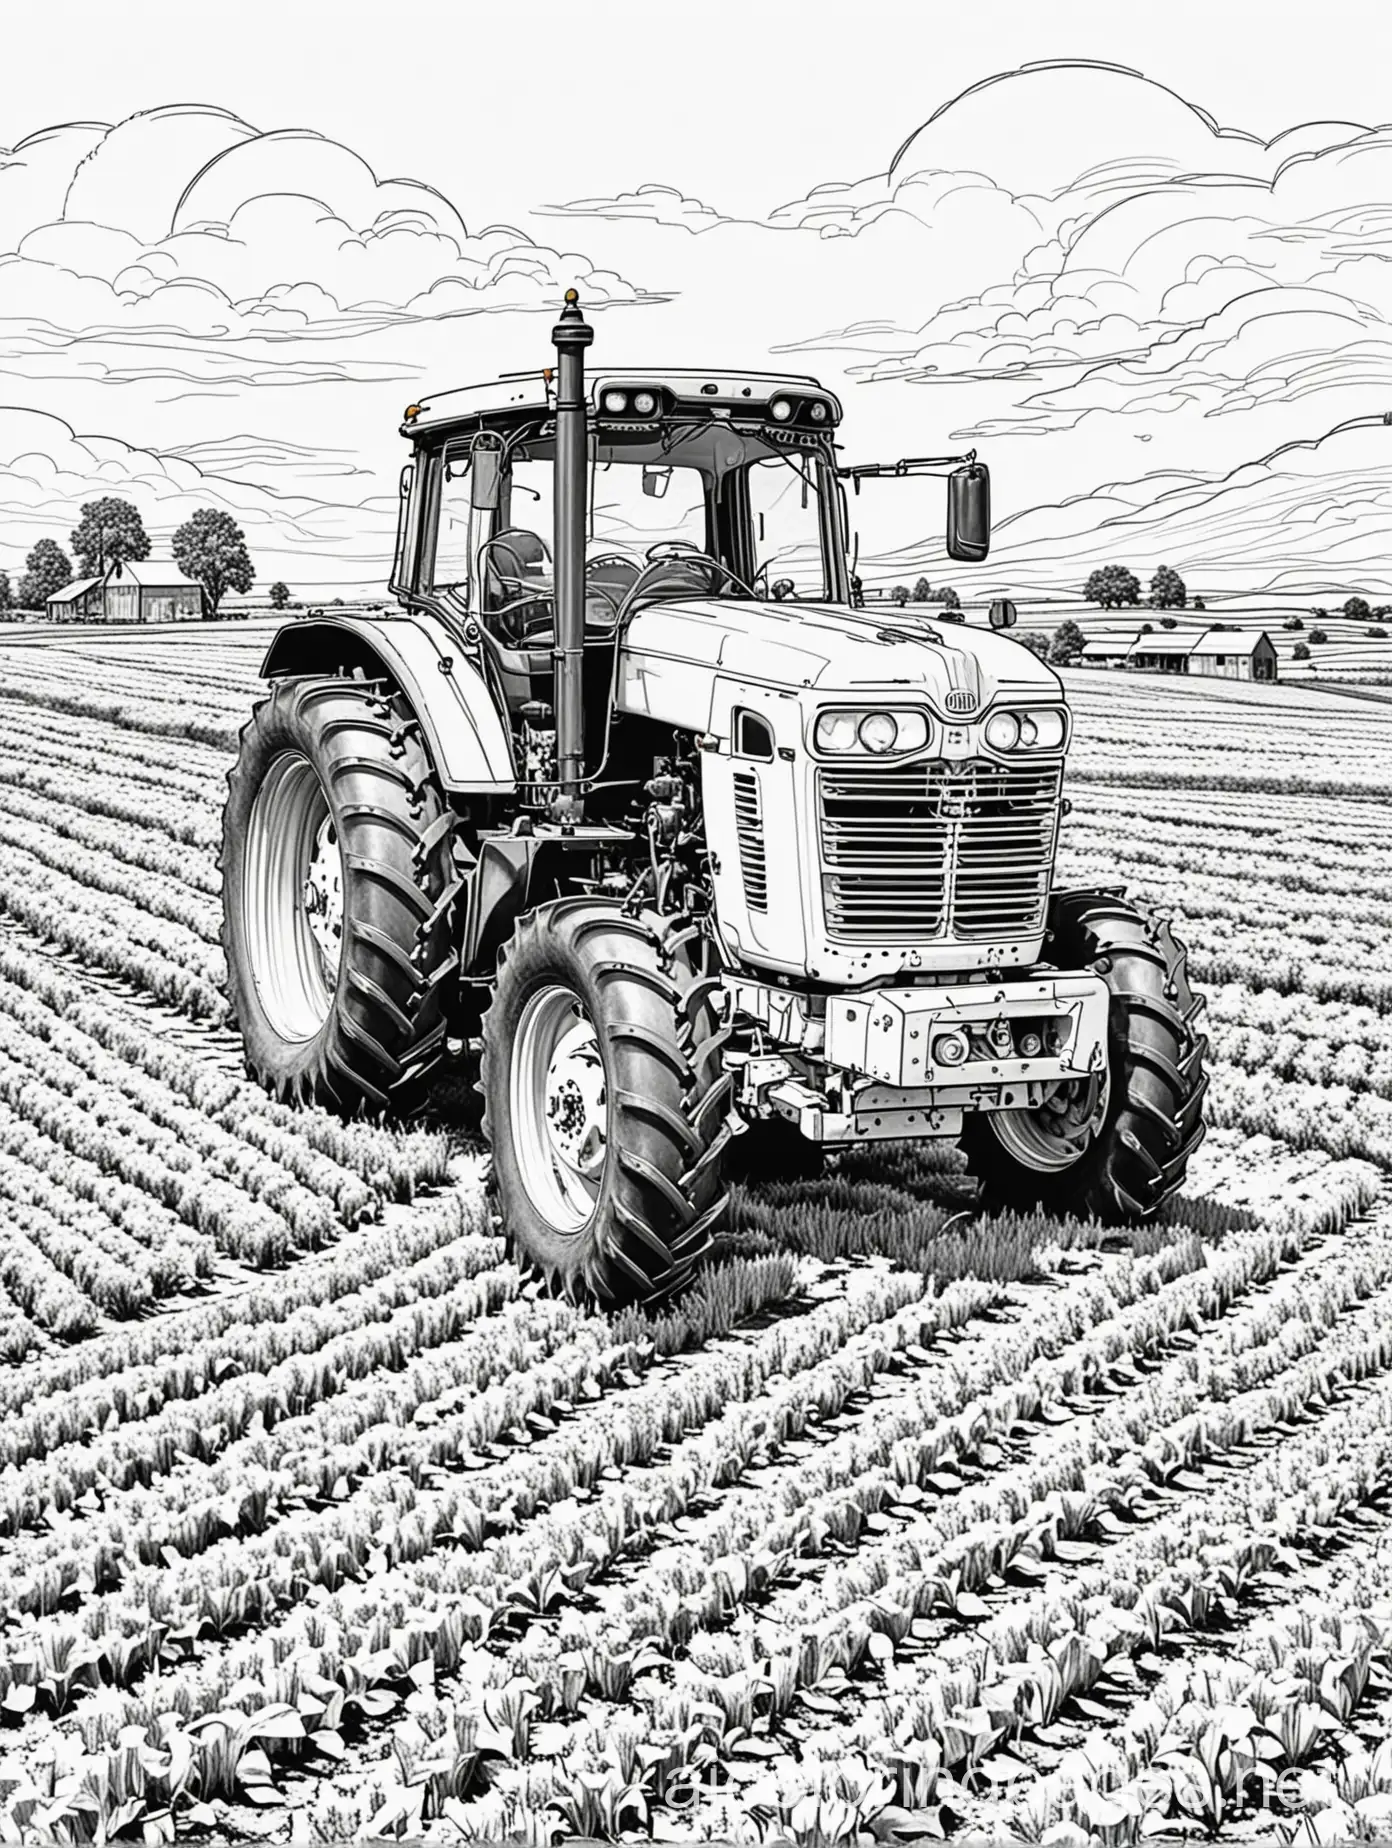 Tractor-in-Farm-Field-Coloring-Page-Bold-Lines-and-Simplicity